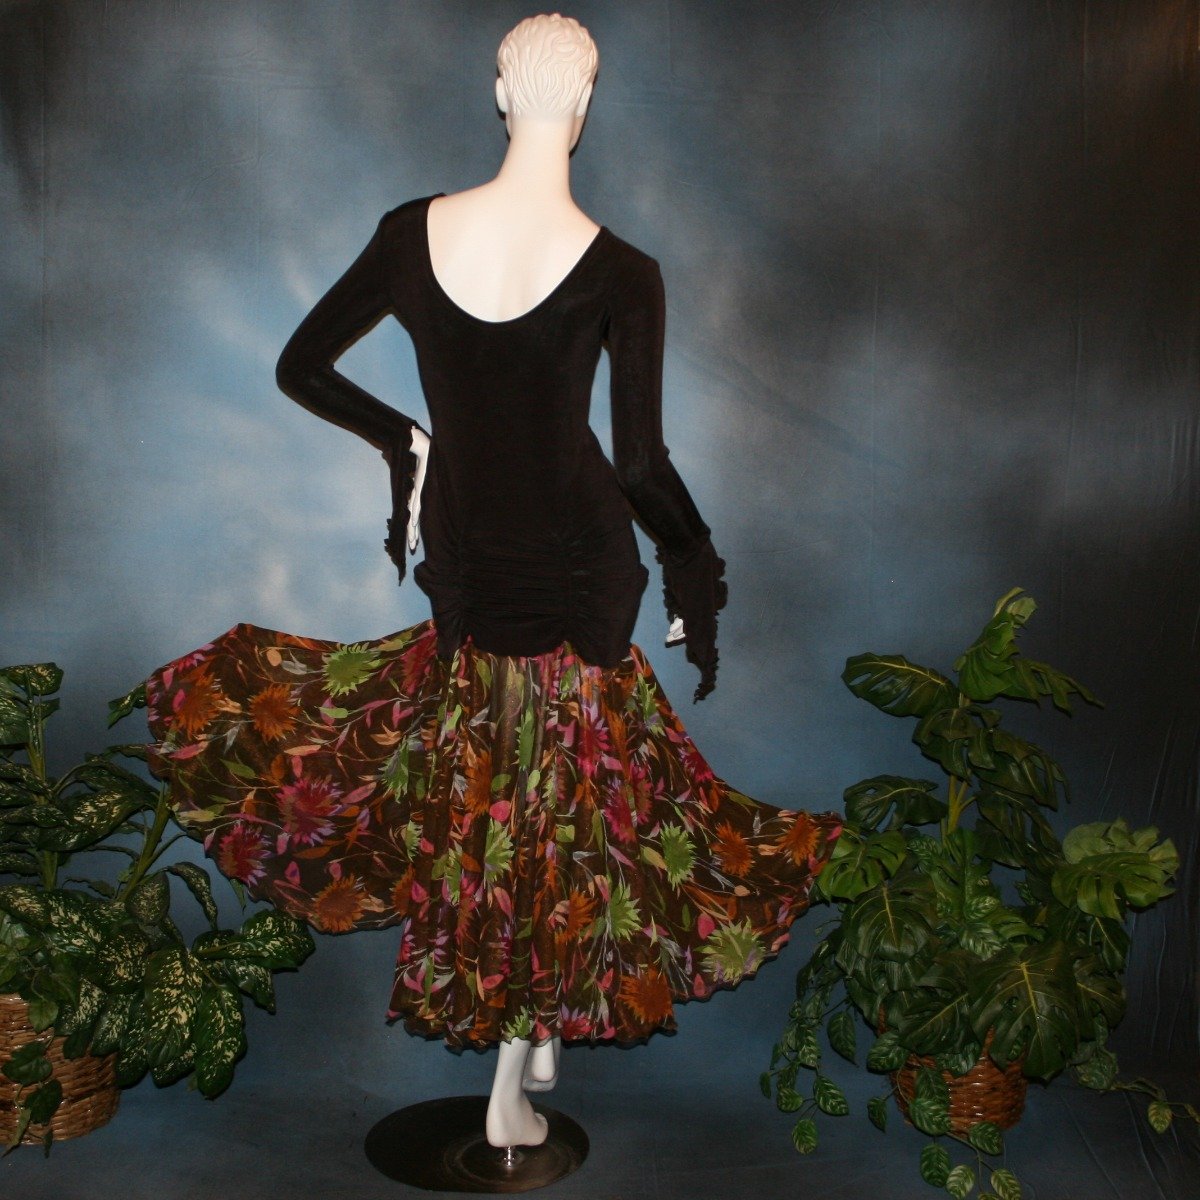 Crystal's Creations back view of Deep chocolate brown social ballroom dress created of luxurious deep chocolate brown solid slinky base featuring ruching through the hip area, & interesting long flared sleeves, with yards of fall colored flowers chiffon petal panels